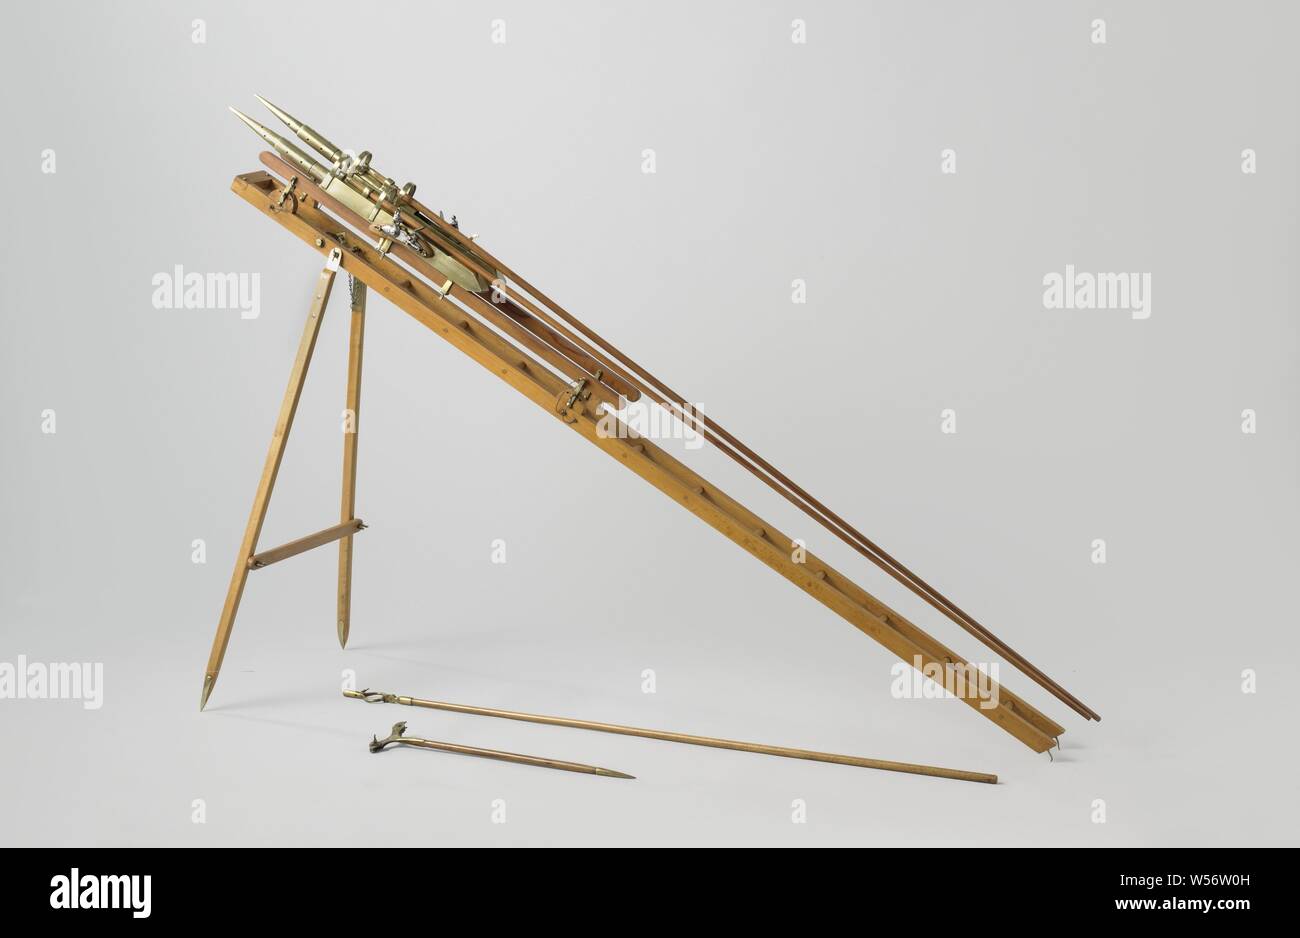 Model of Two Congreve Rockets with Launching Gear, Model of two fire missiles, designed by Congreve on a launcher or chair, for use on land. The rockets themselves consist of a pointed cylinder, the tip of which is the fire bomb and the rear part is the rocket engine, a long stabilizing pole is mounted on the outside of the cylinder. The chair consists of a ladder-shaped frame that together with two legs forms a tripod, A running ring is provided at the front of the frame, which can be wrapped around the front mast of a sloop and guides the movement of the frame during lifting and lowering for Stock Photo